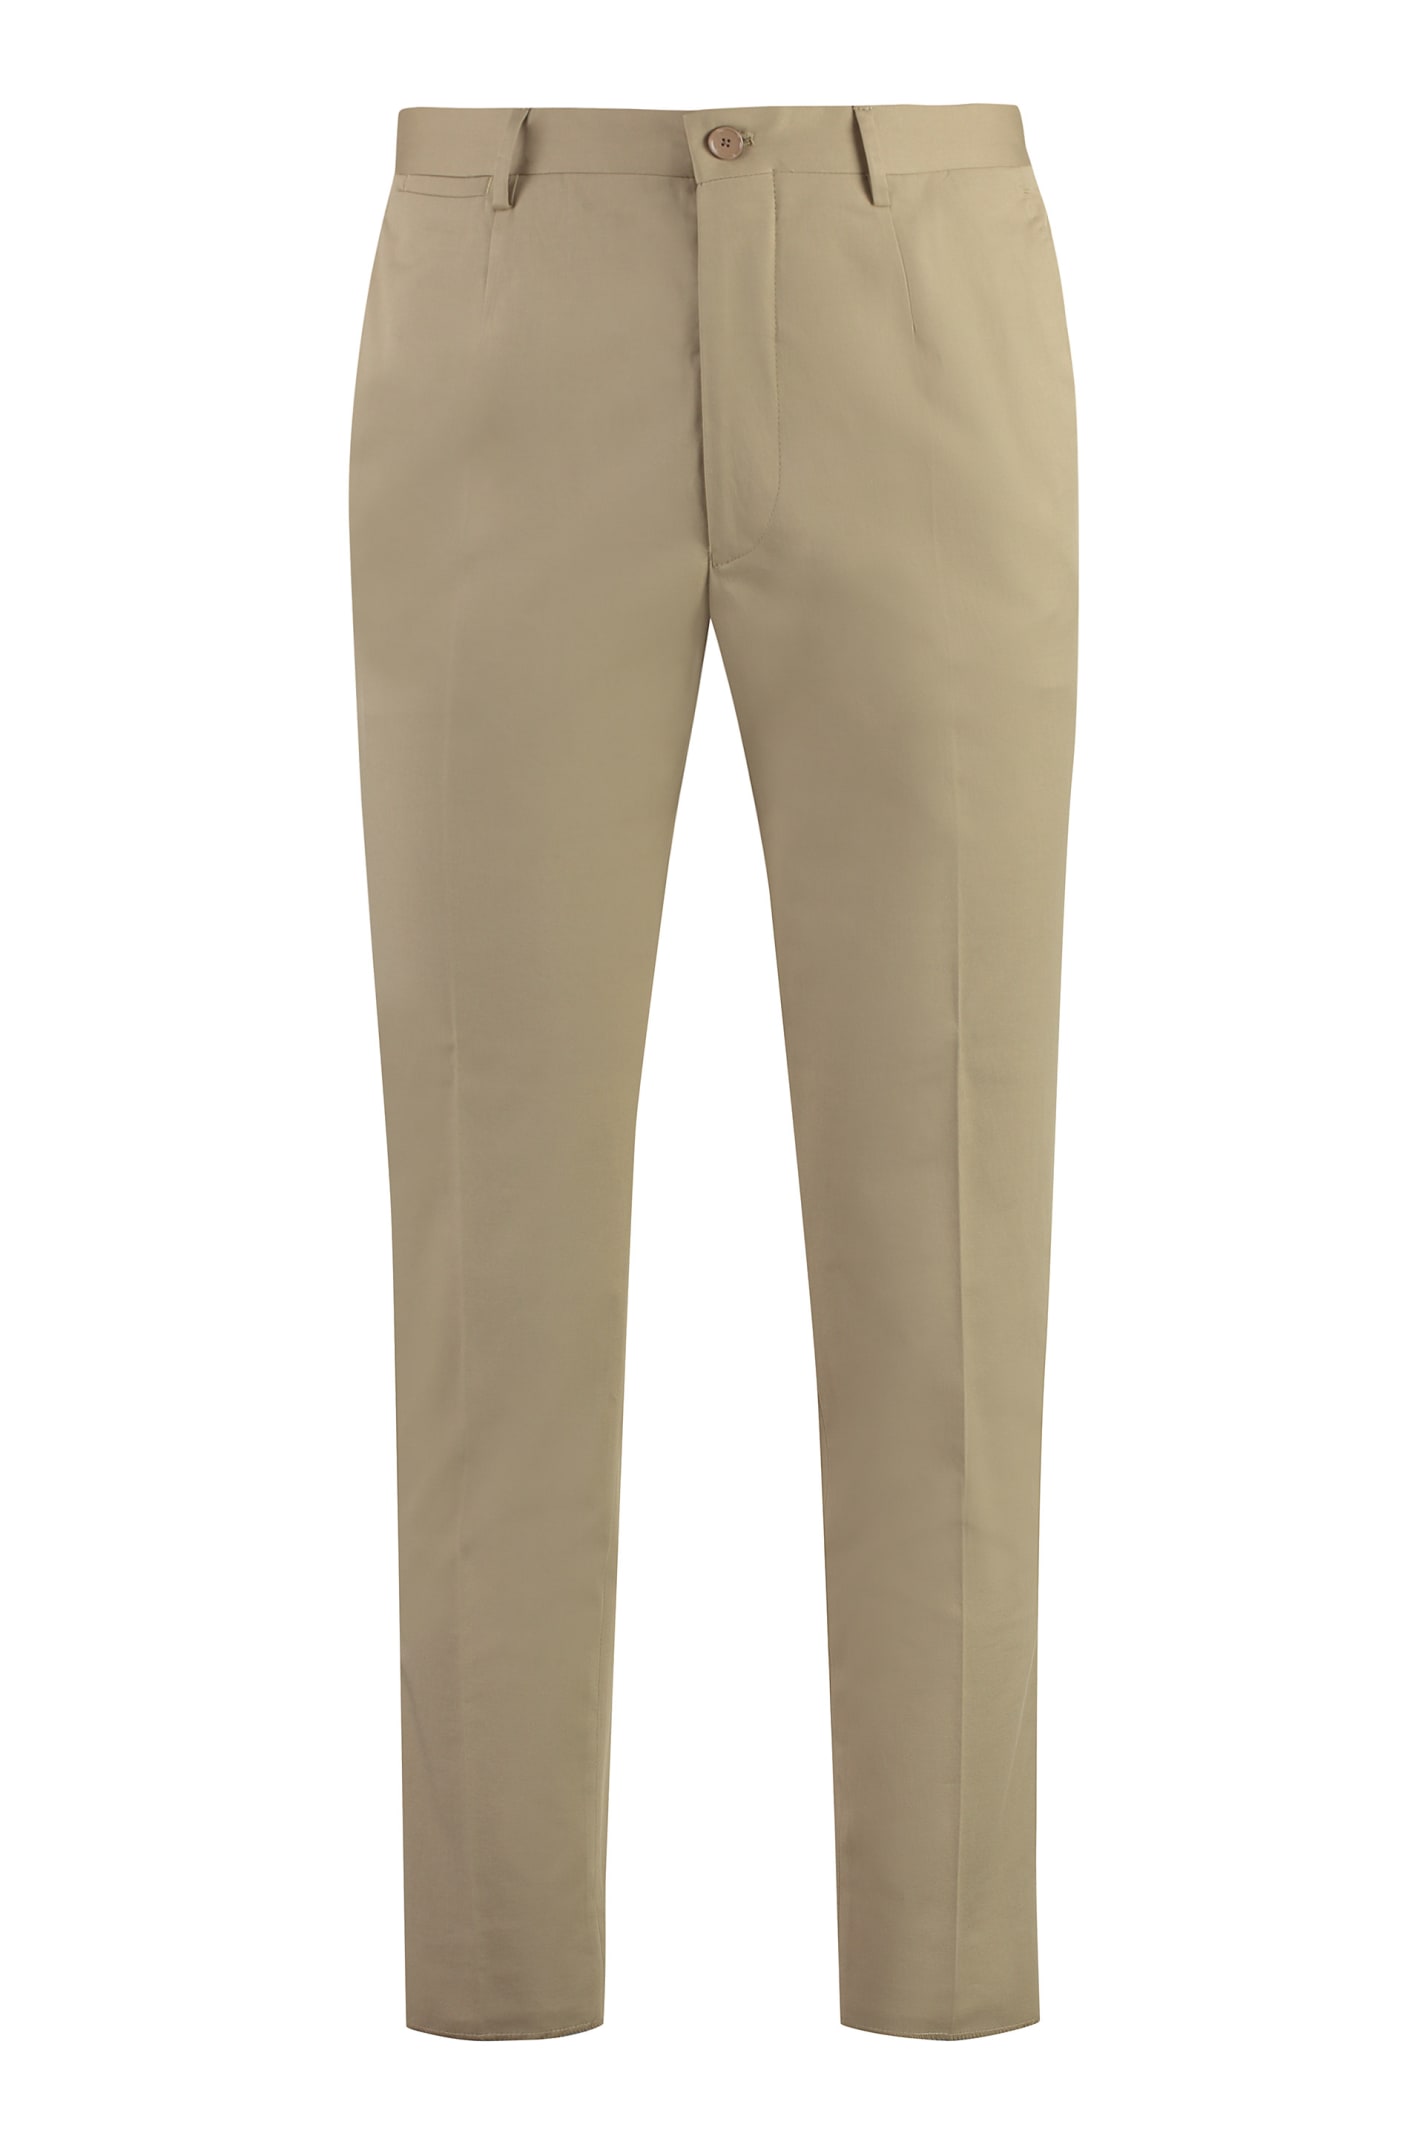 Etro Cotton Trousers In Neutral